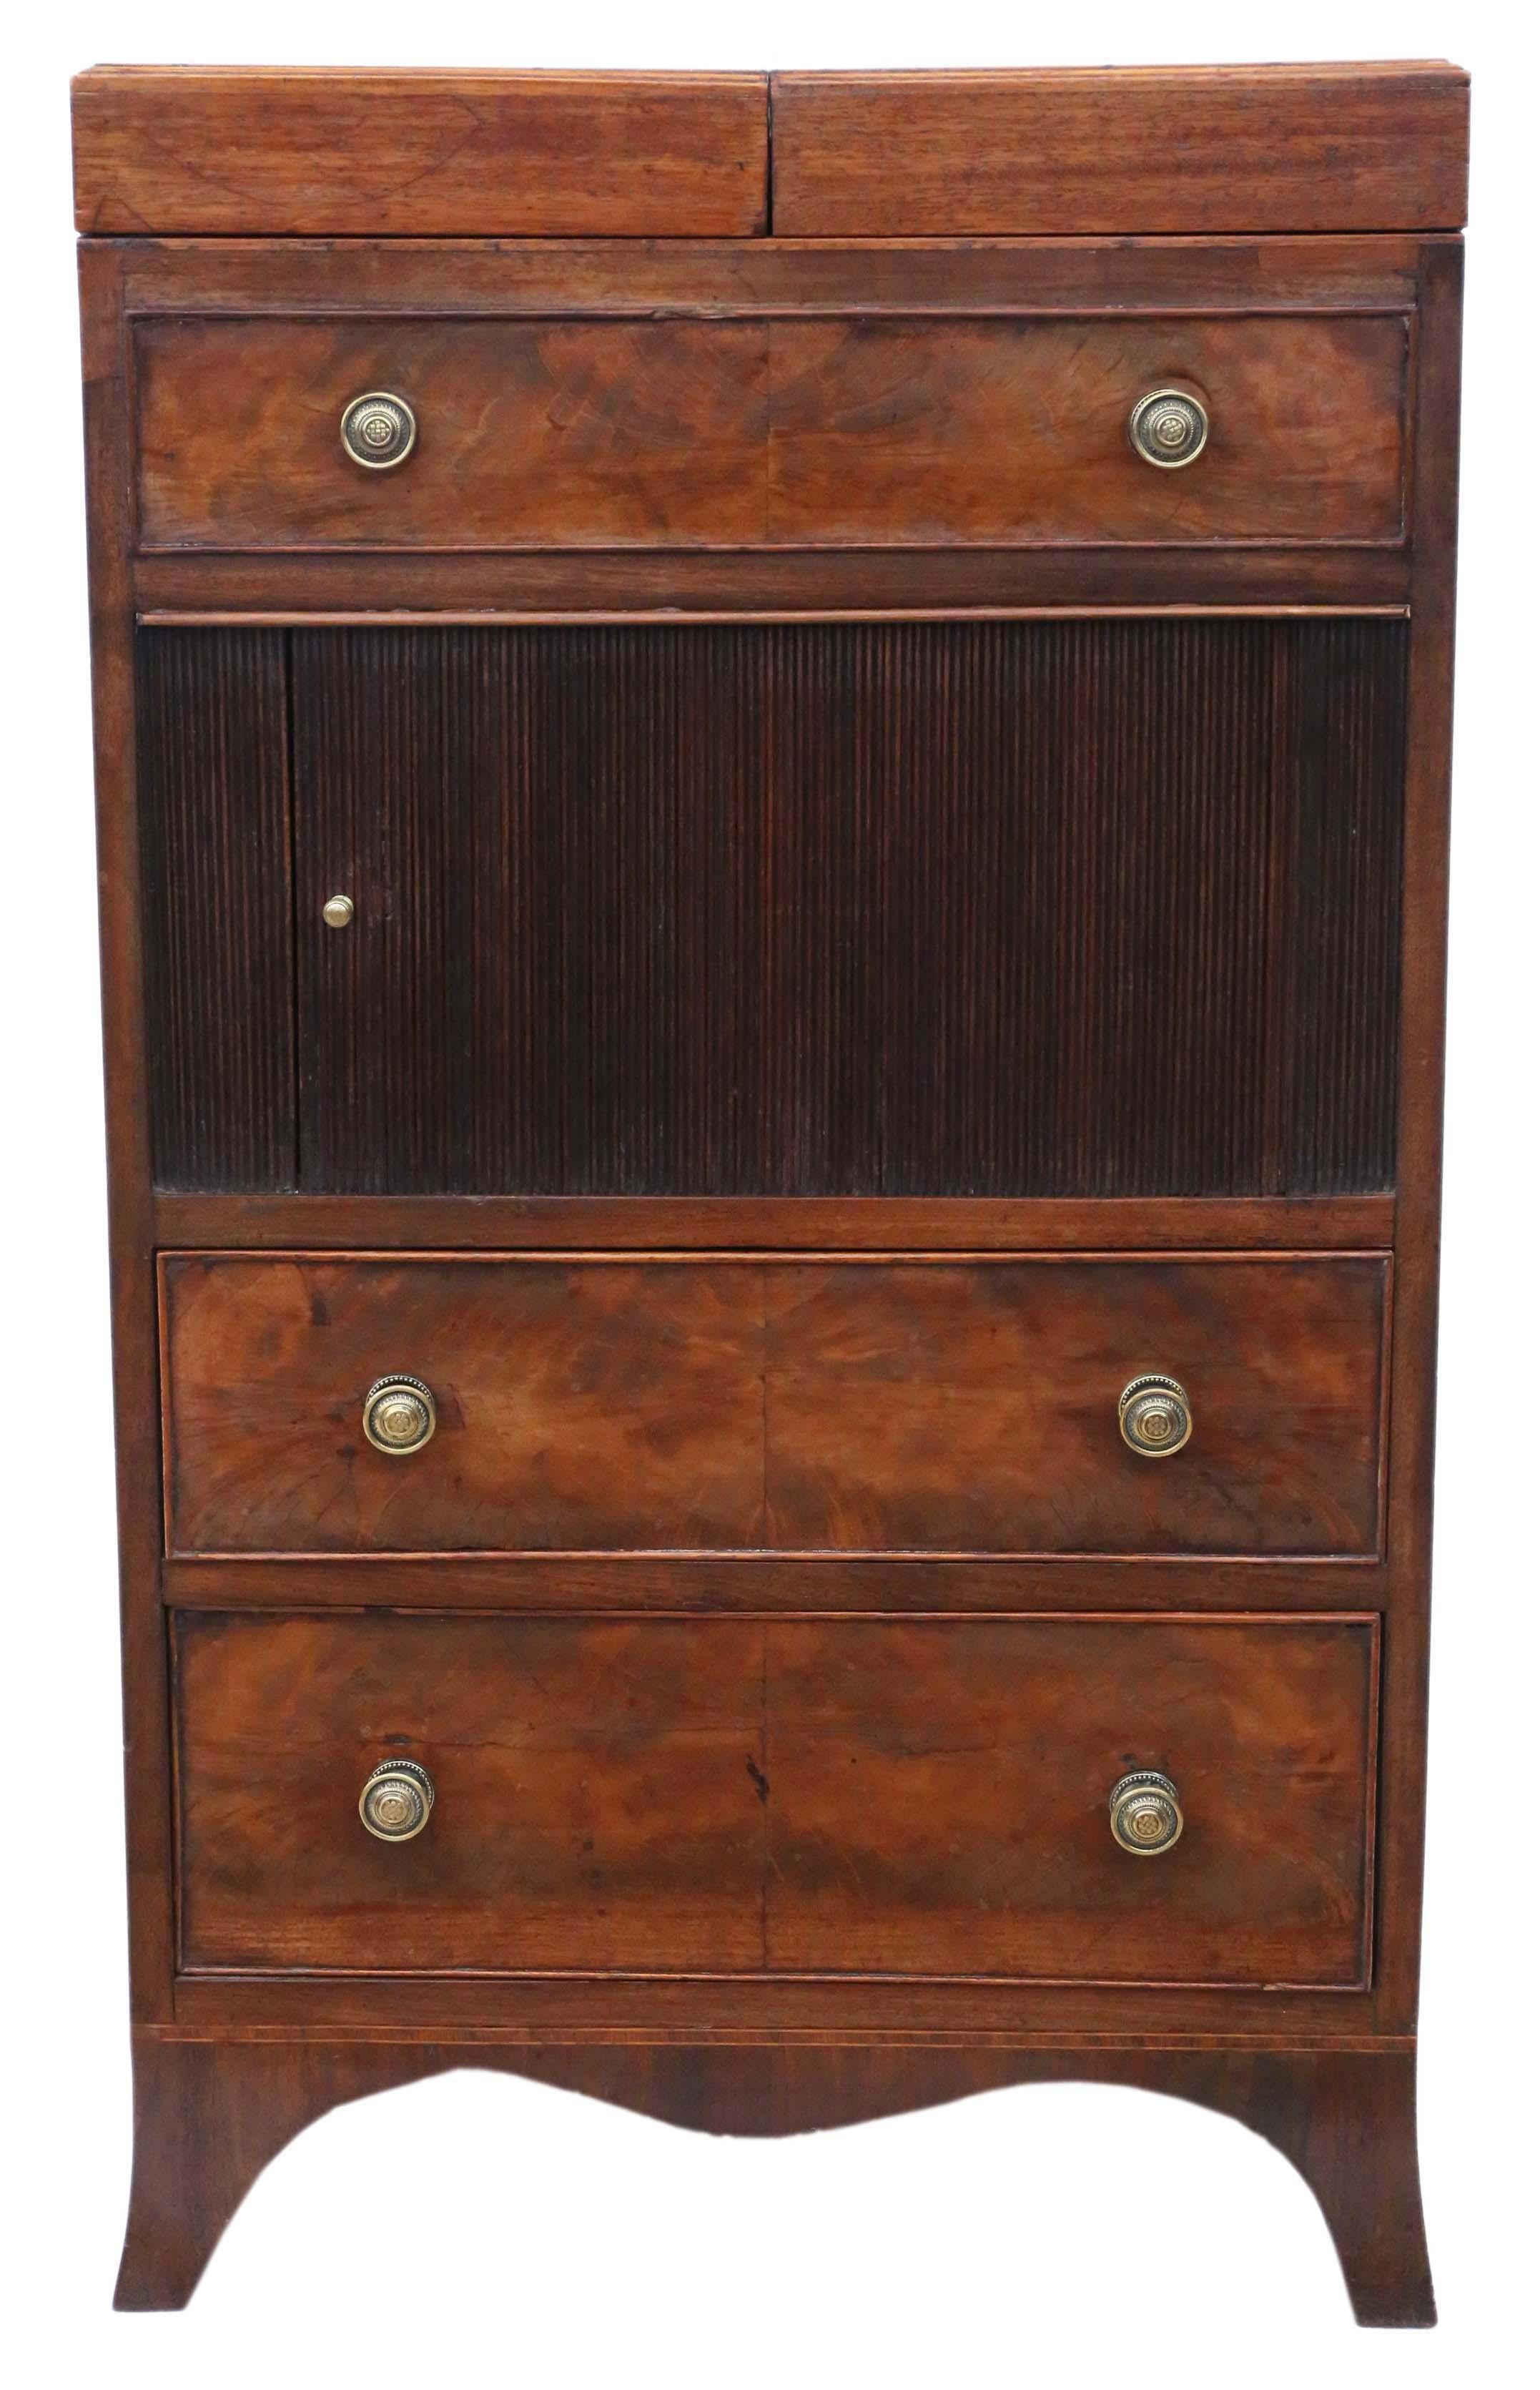 Antique quality large mahogany washstand bedside table circa 1810 Georgian. Lovely tambour front.

Great rare item, which is solid with no loose joints. The oak lined drawers slide freely.

Lovely age, colour and patina.

Measures: 49cm wide